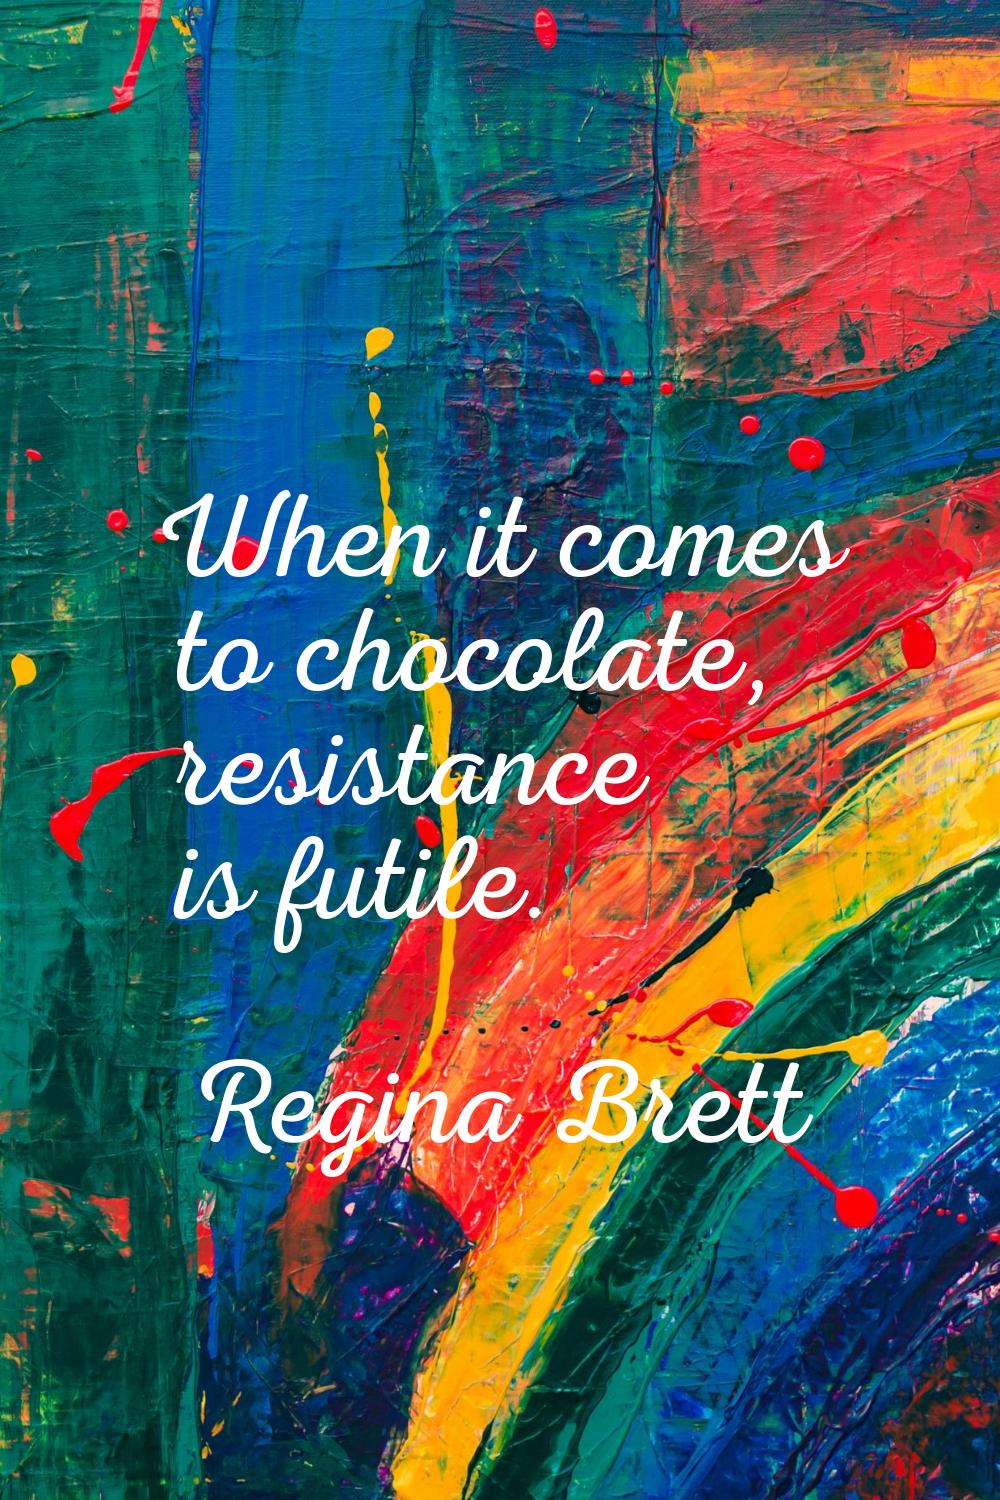 When it comes to chocolate, resistance is futile.